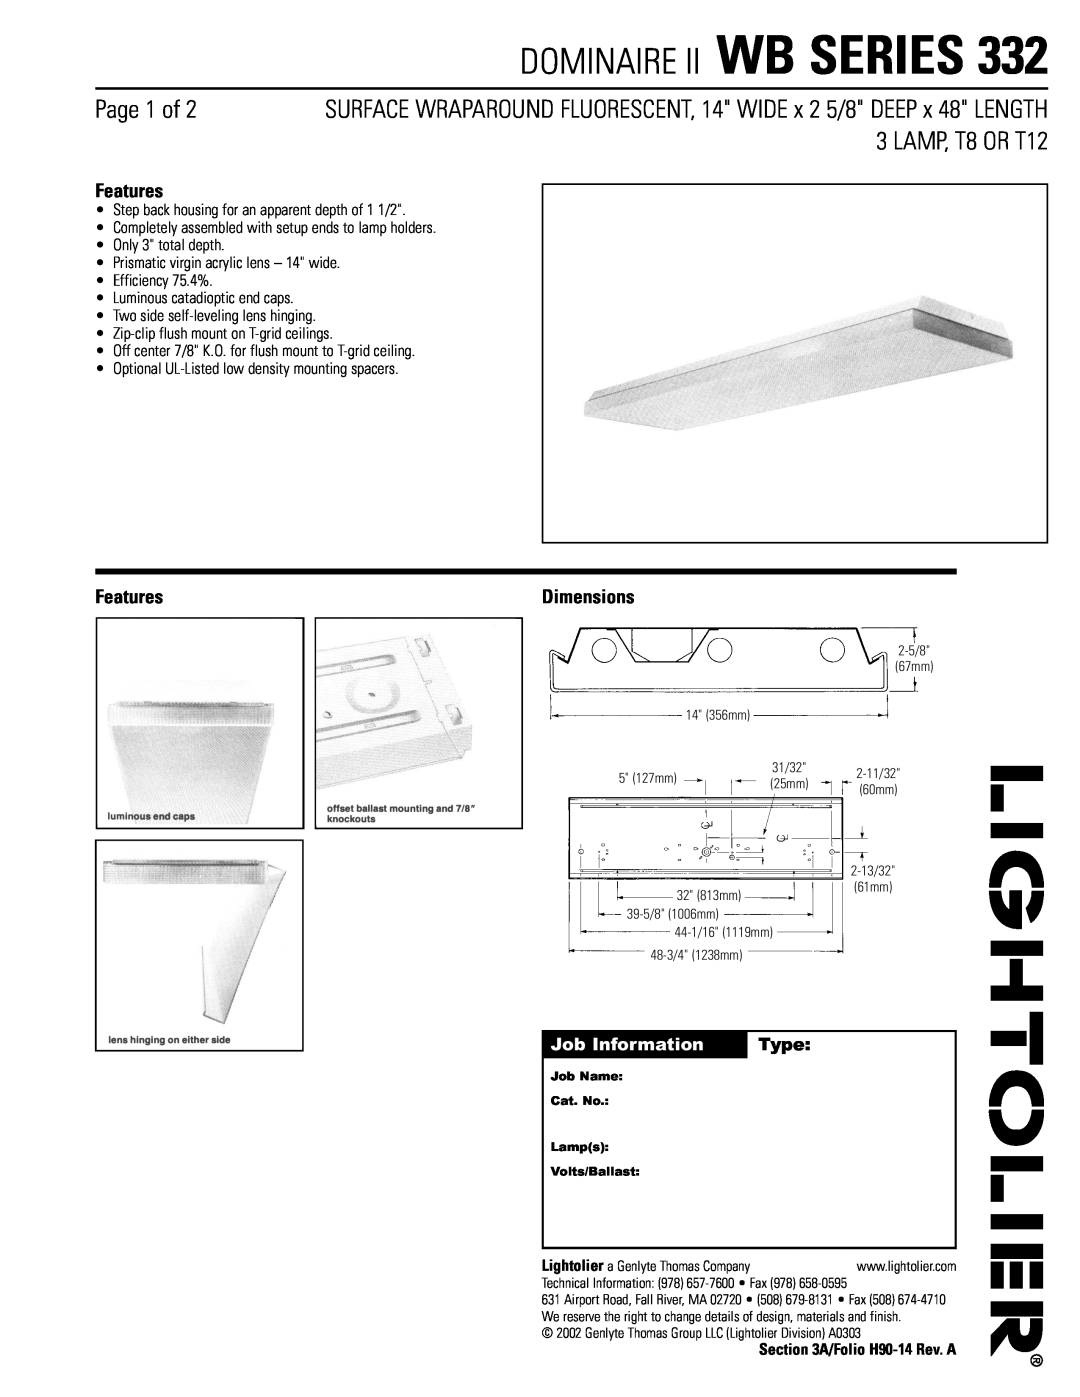 Lightolier WB Series 332 dimensions Dominaire Ii Wb Series, Page 1 of, LAMP, T8 OR T12, Features, Job Information, Type 